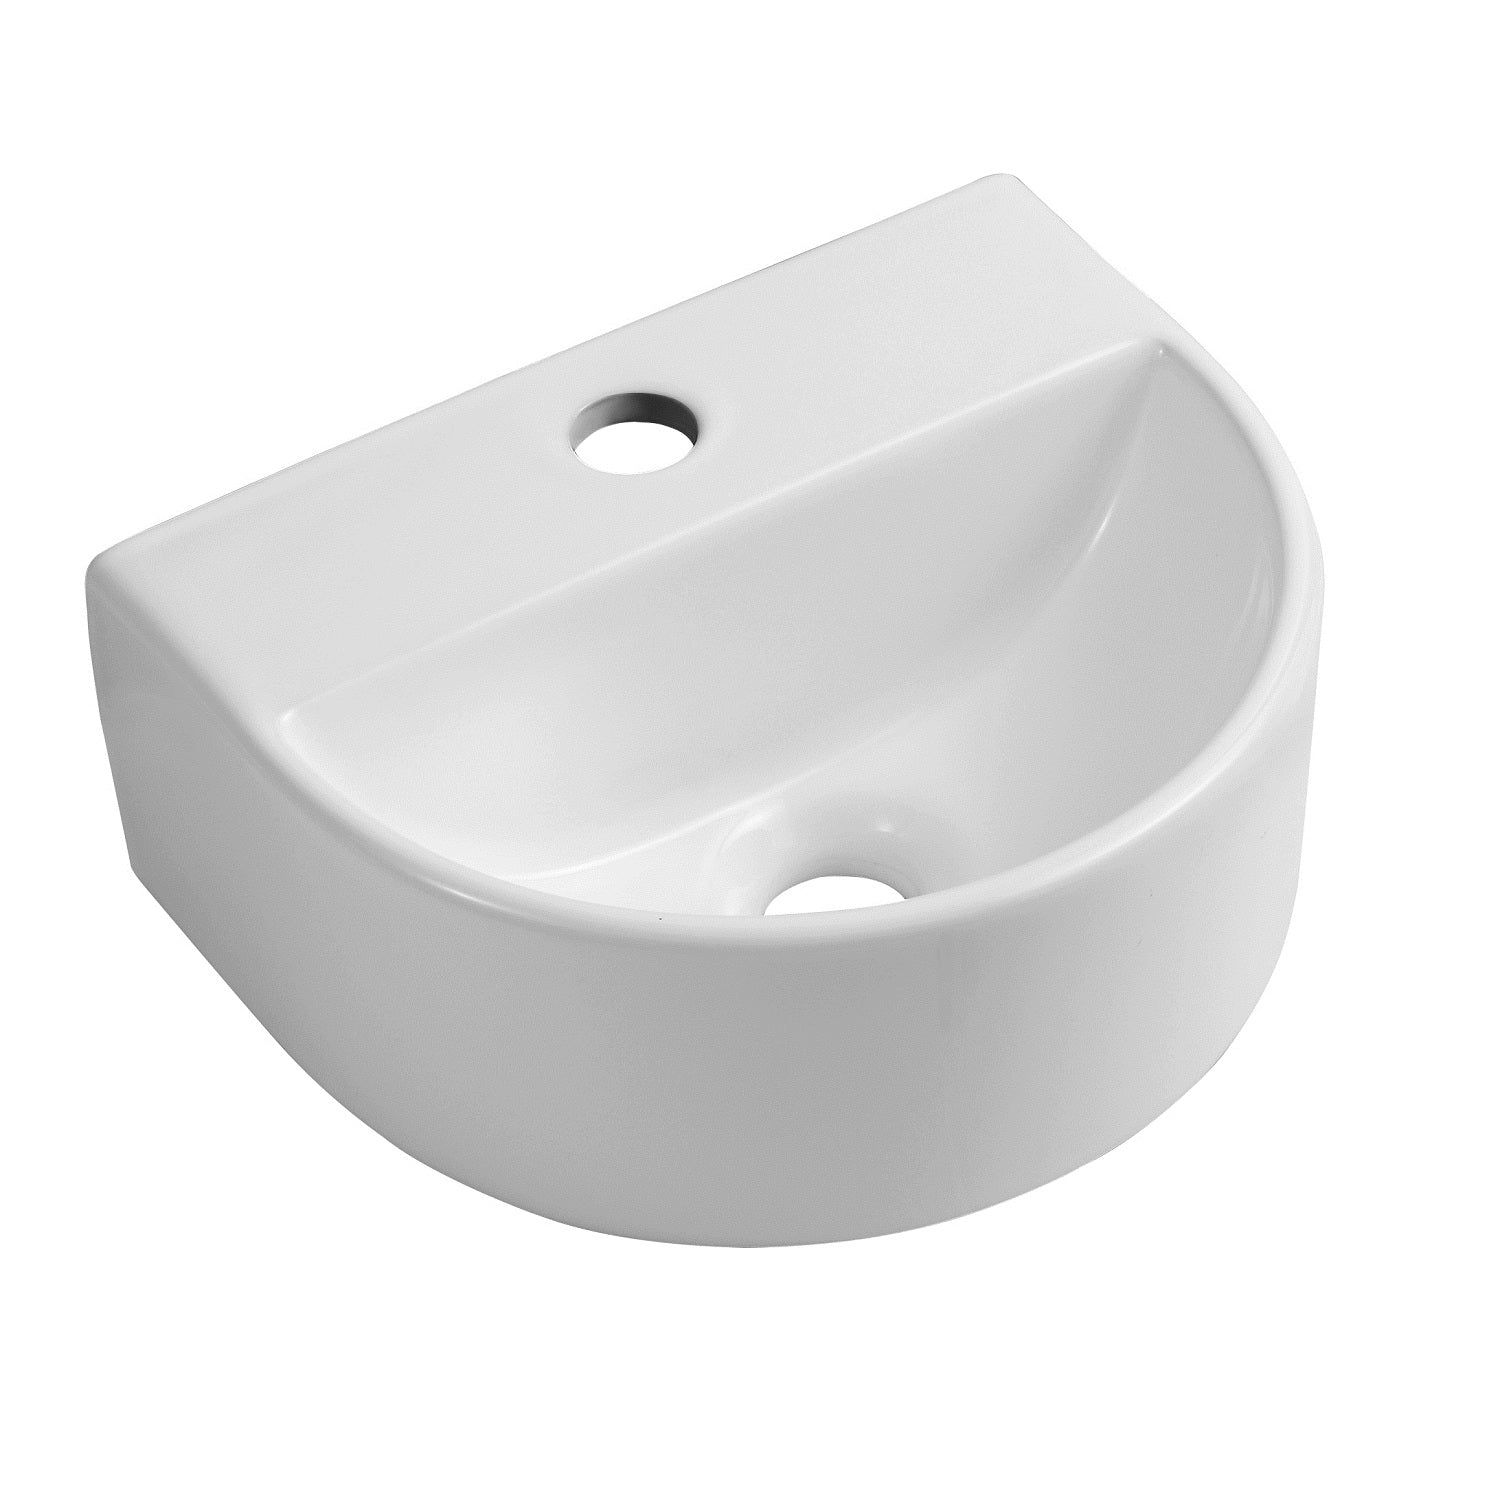 Modern Round Compact Ceramic Wall Hung Cloakroom Basin - 305mm x 255mm - Gloss White